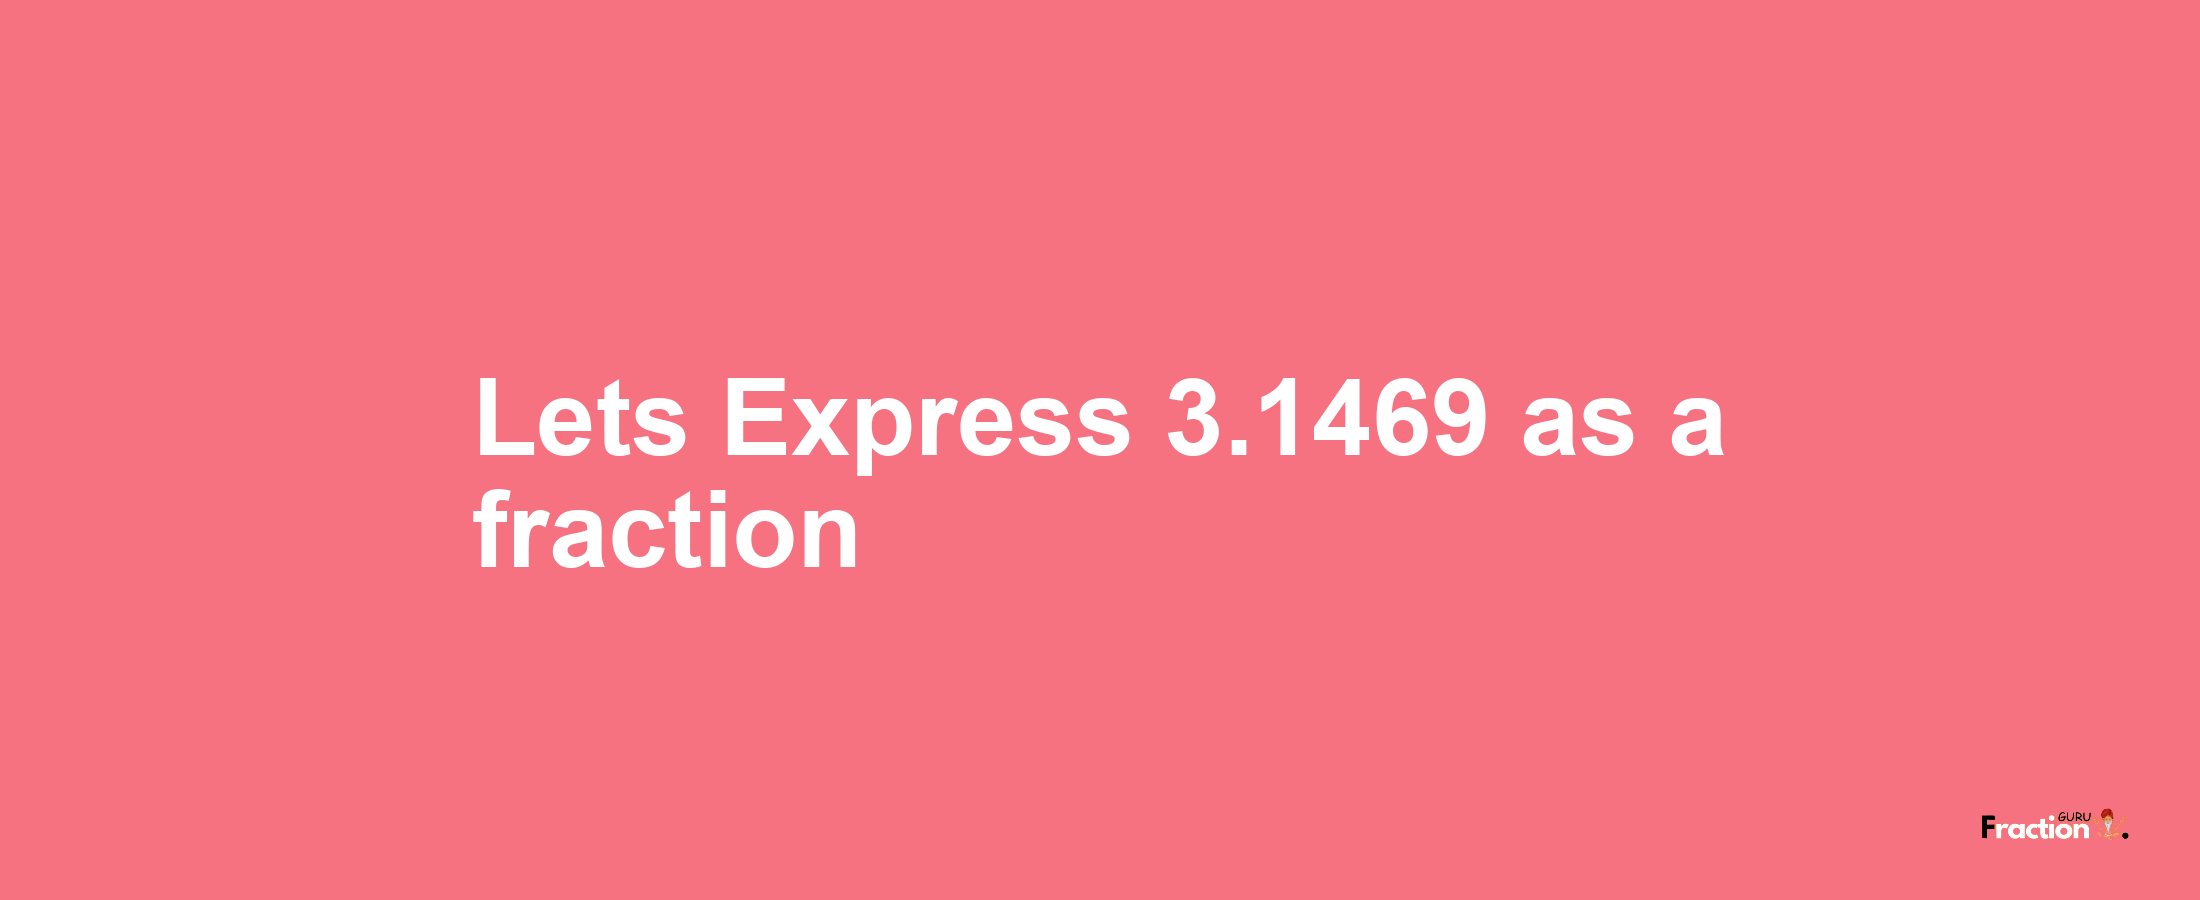 Lets Express 3.1469 as afraction